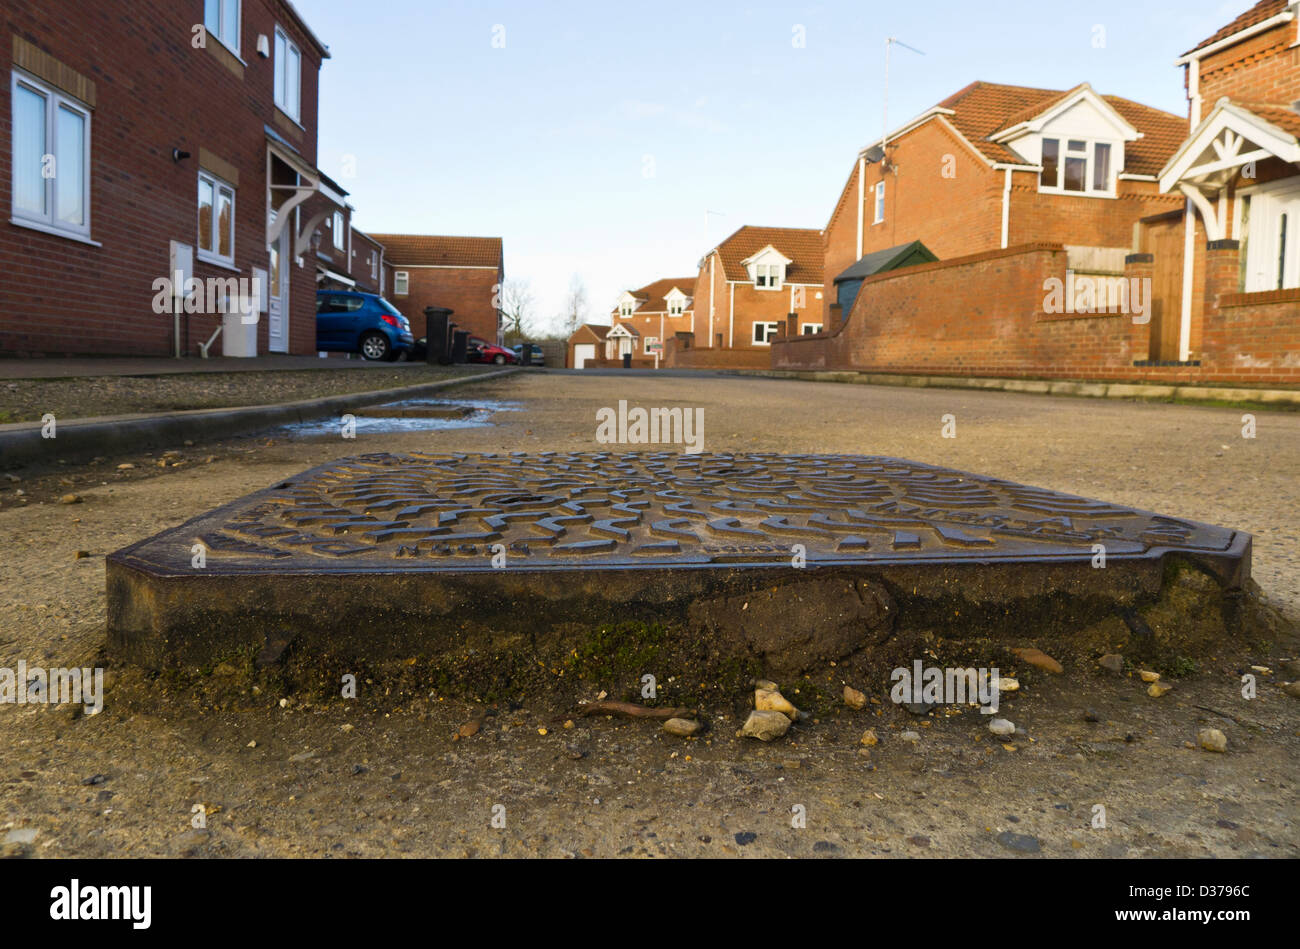 A raised manhole cover on a poorly surfaced road in King's Lynn, Norfolk. Stock Photo